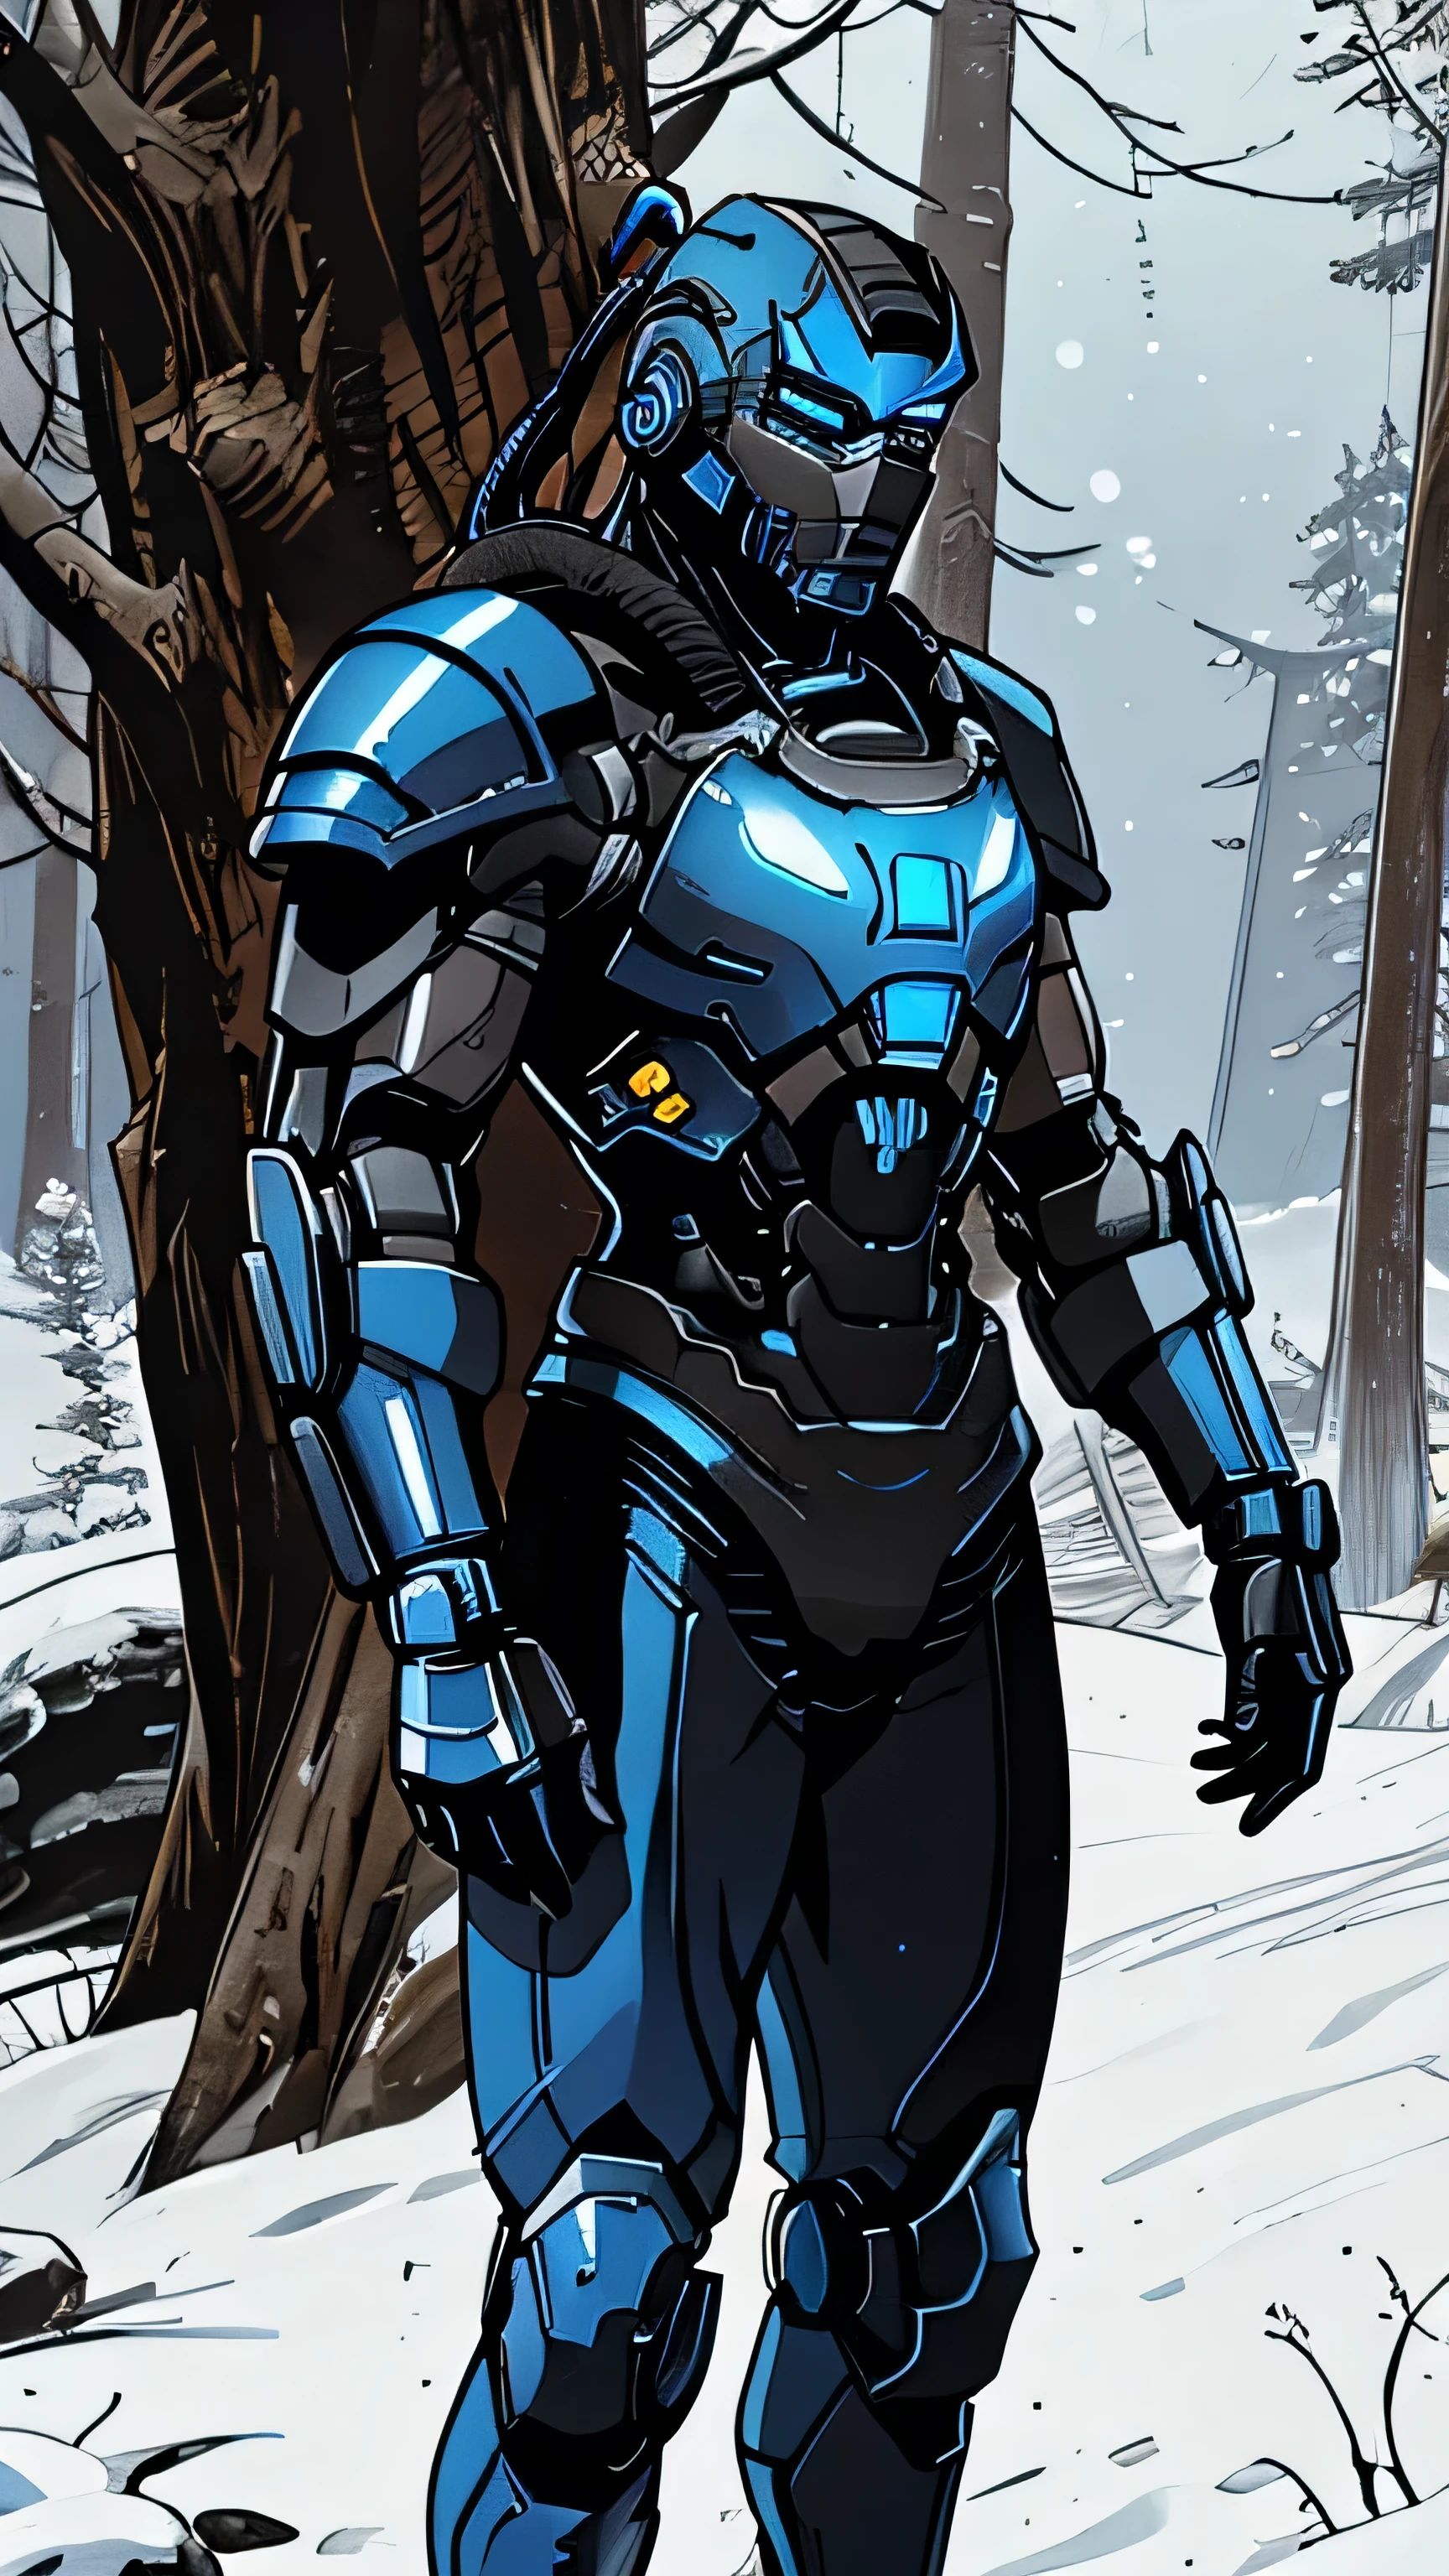 Sub-Zero from Mortal Kombat, zxcrx, cyborg ninja, sleek (blue and black armor:1.5), various robotic components, his face is covered by a helmet with a glowing ligh blue visor, ice blades, cold, 1man, solo, full body view, front view, looking at viewer, intricate, high detail, sharp focus, dramatic, photorealistic painting art by greg rutkowski